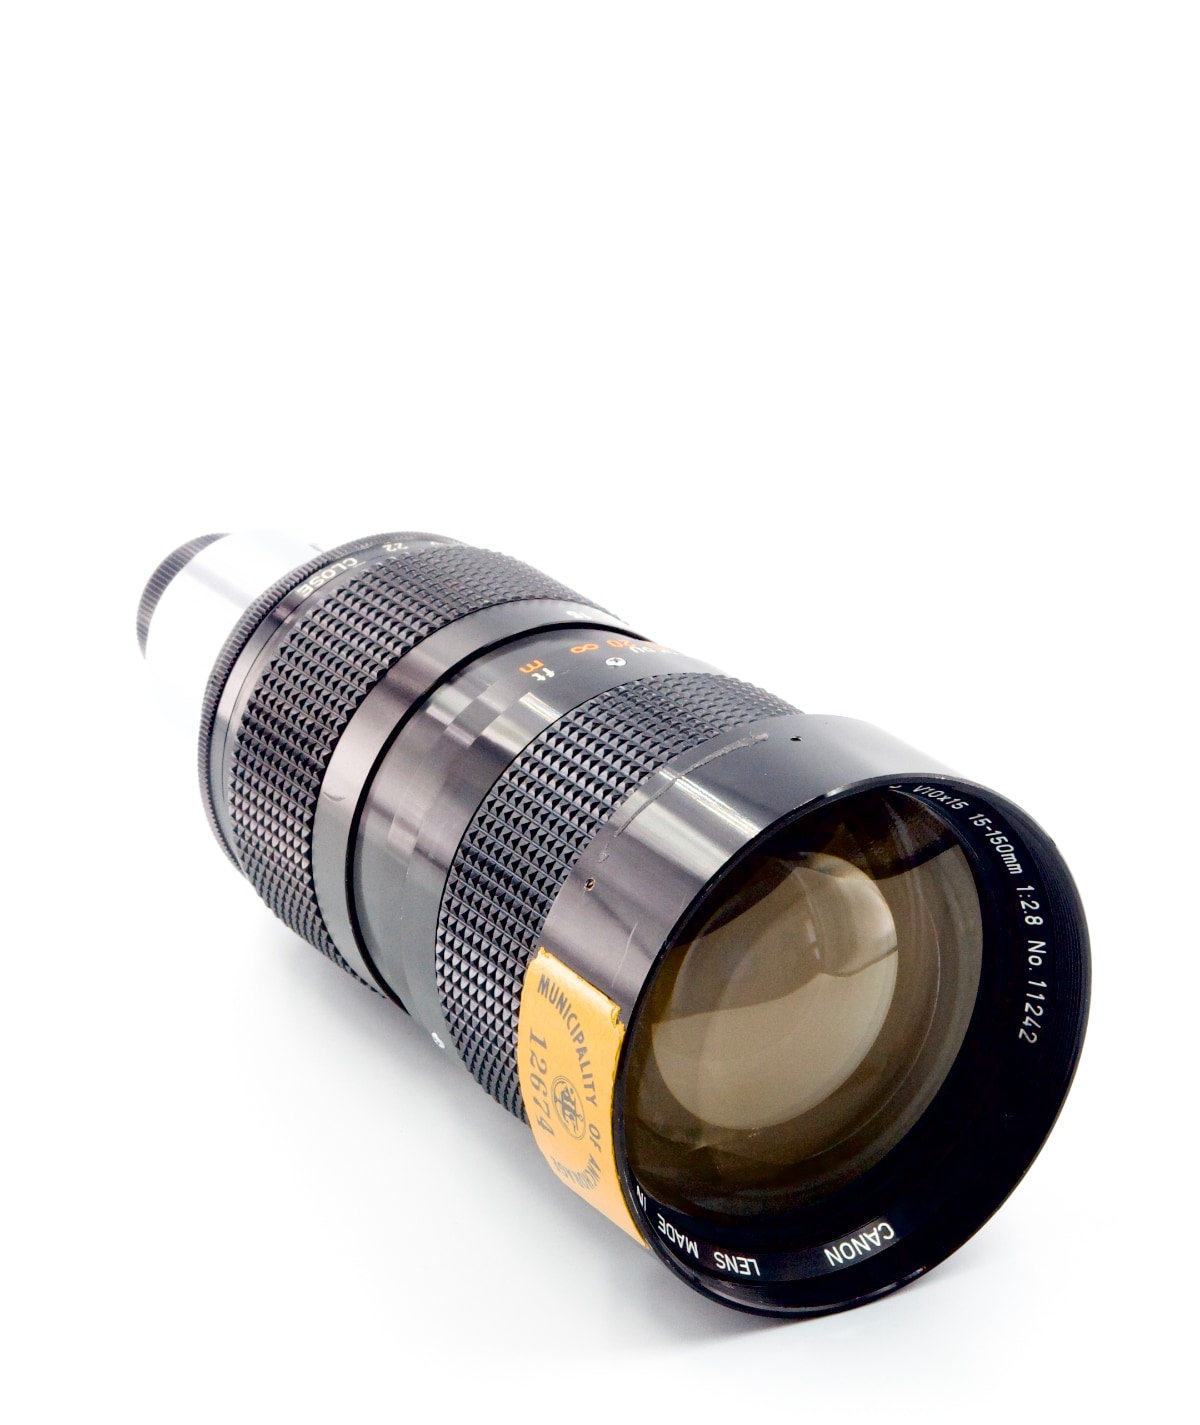 Canon TV Zoom Lens 15-150mm F2.8 - CCD Cine 16